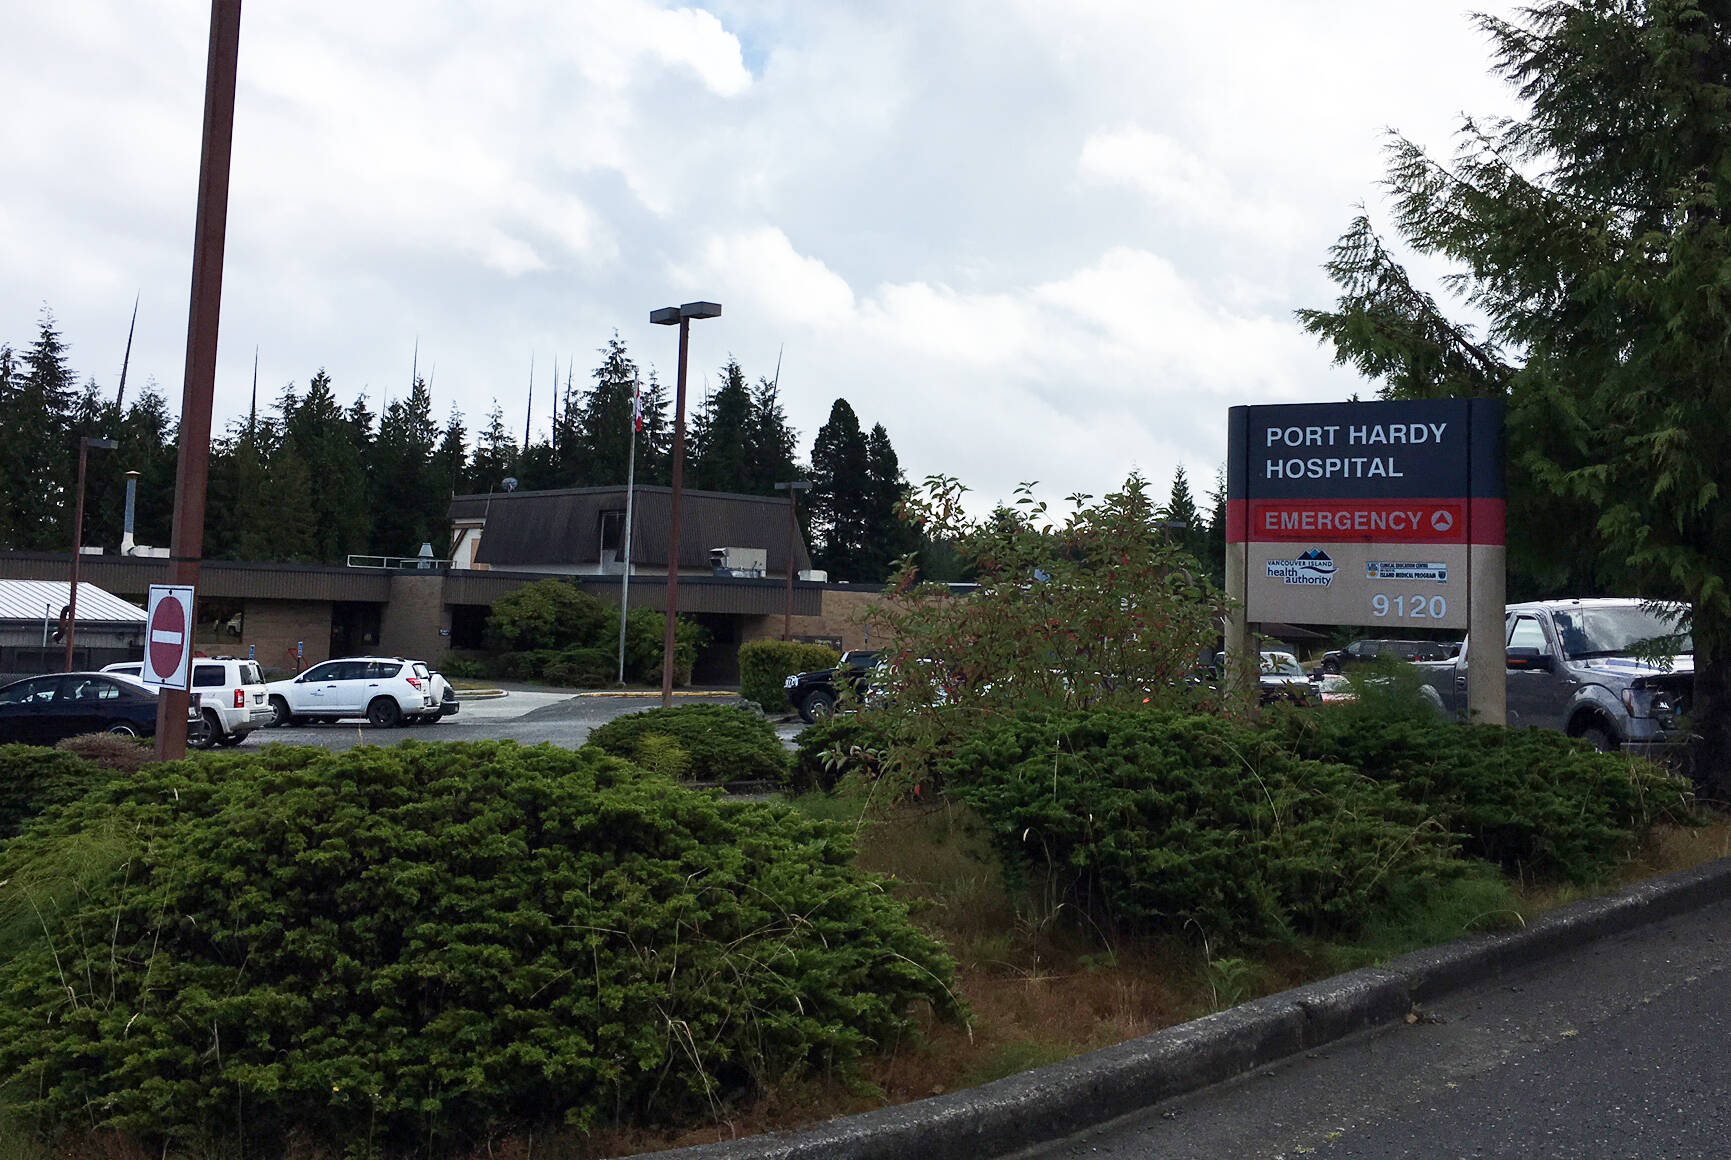 Six emergency shifts at Port Hardy Hospital remain uncovered in September, according to minutes of a recent Island Health meeting. (Island Health photo)